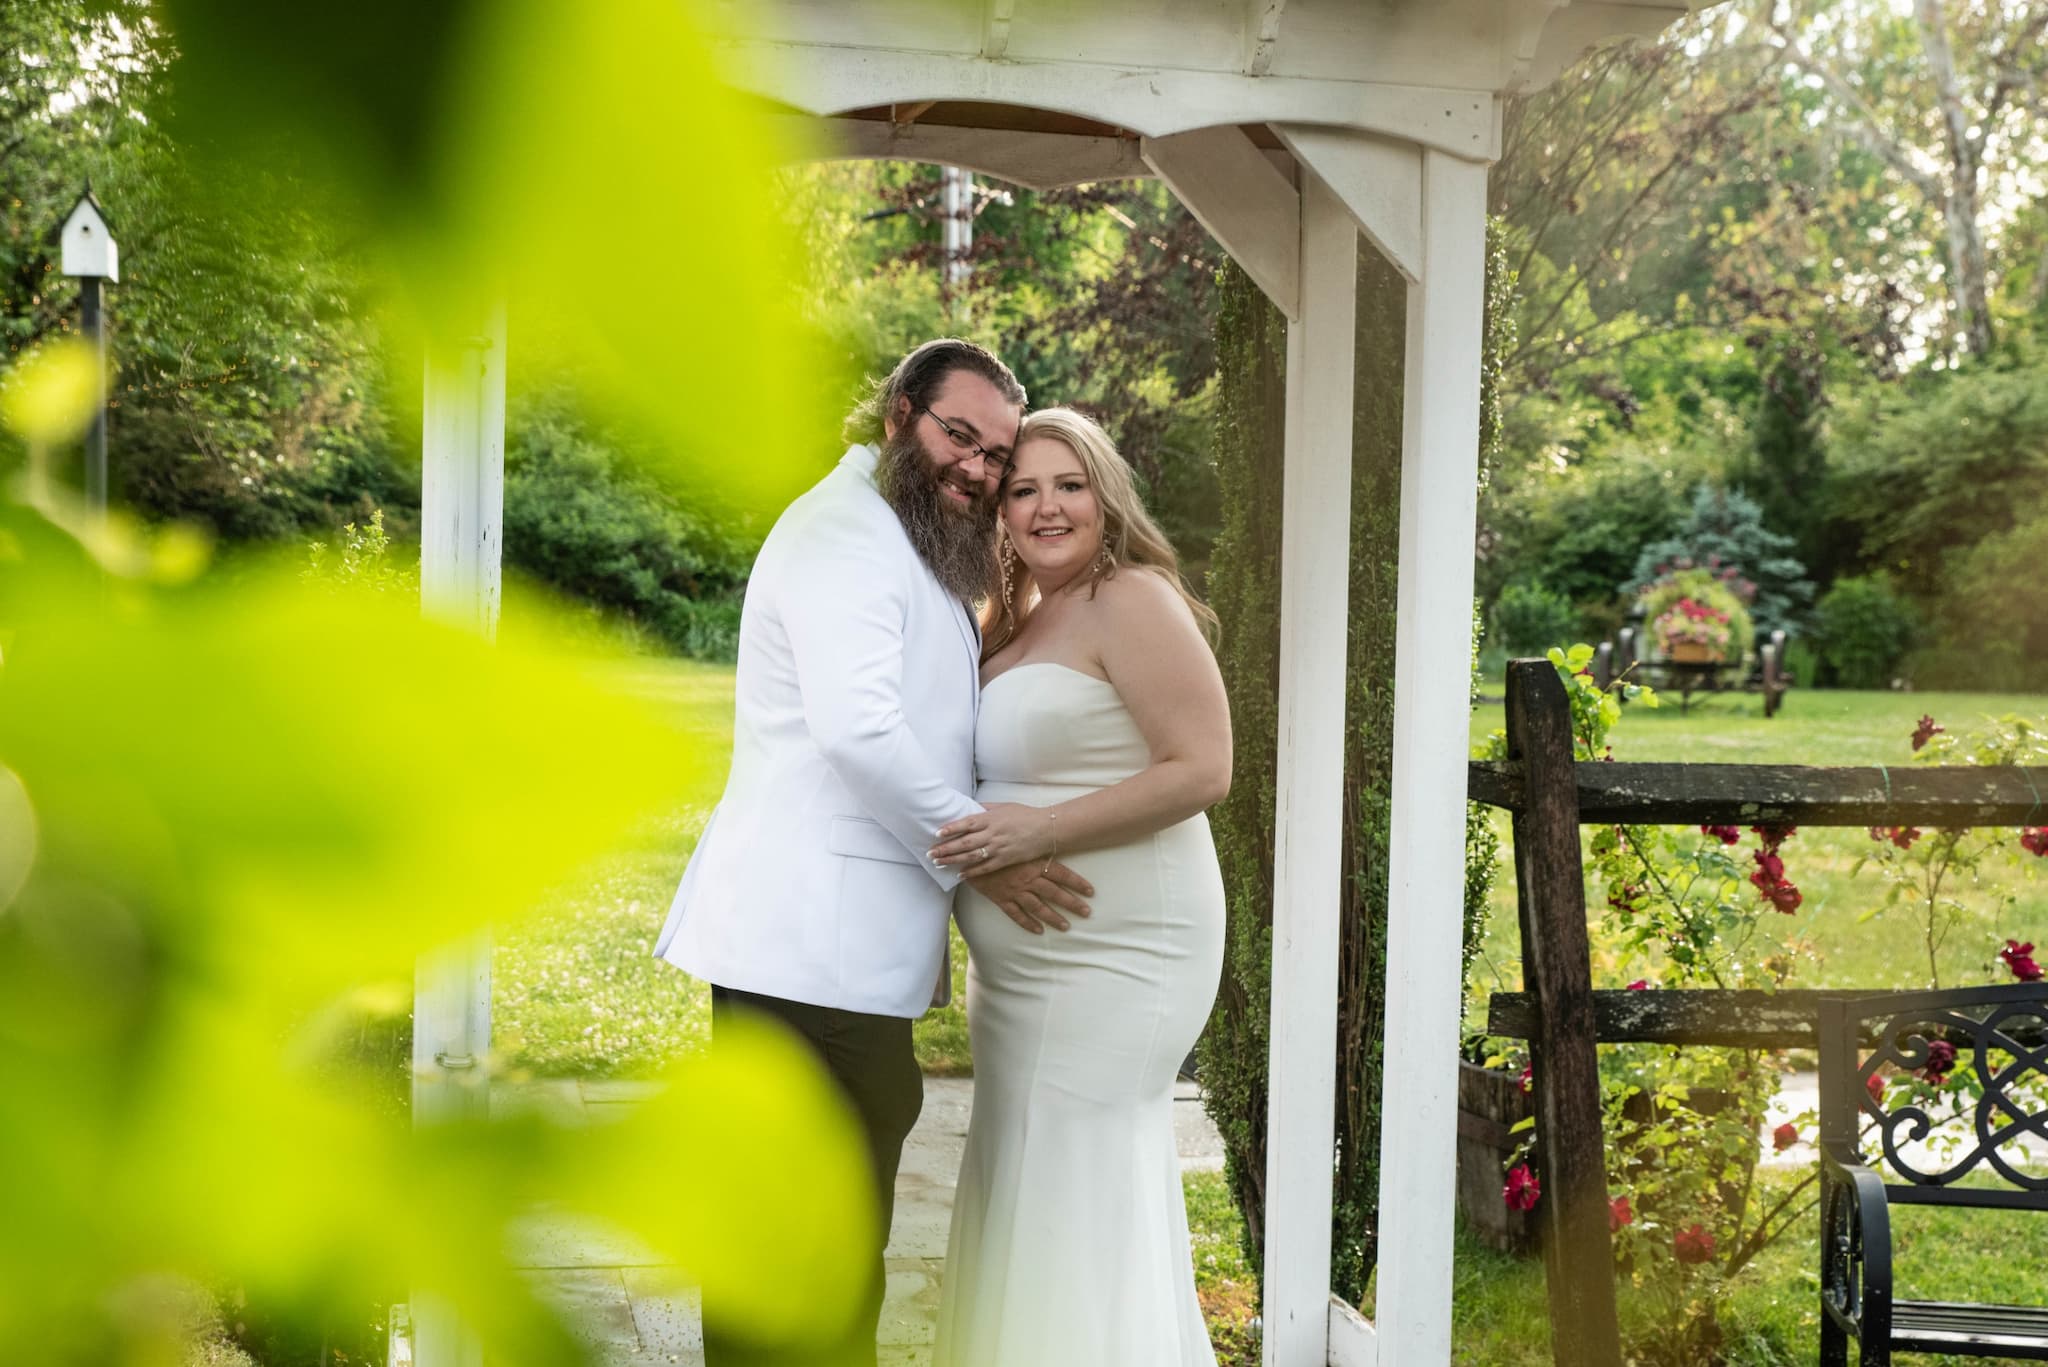 A Perfect Day at The Barn at Boone Dam: Kayla and Sean’s Wedding